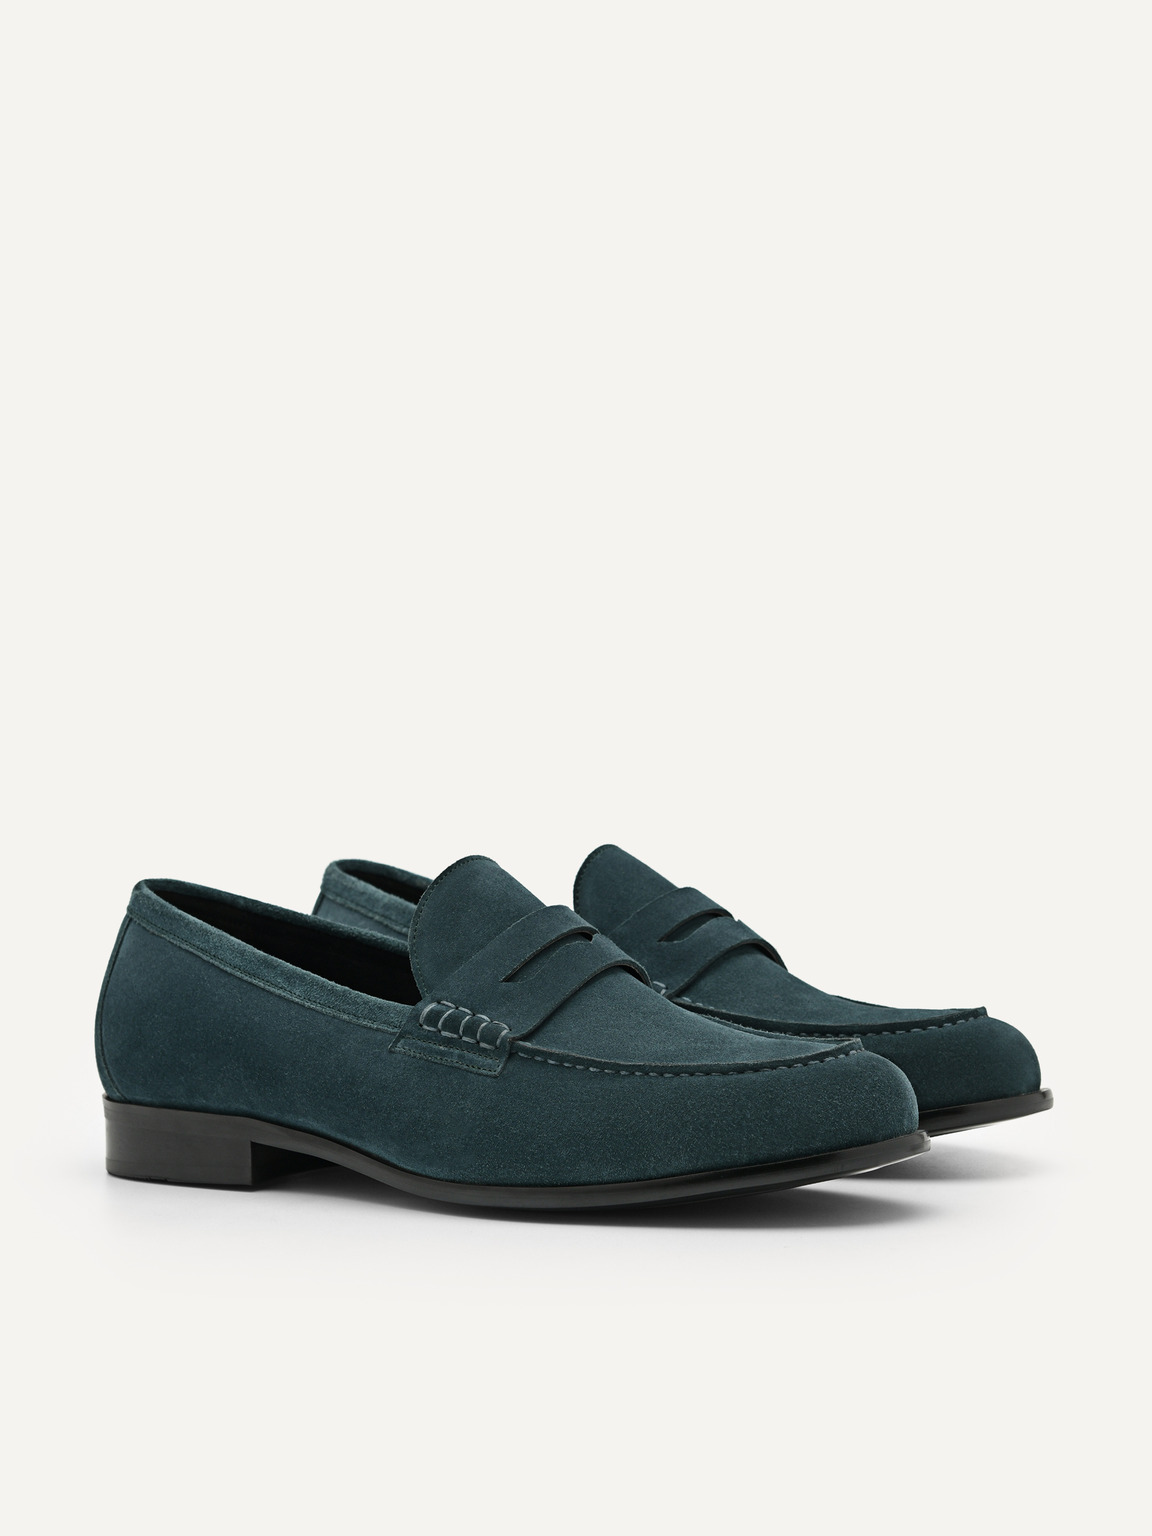 Leather Penny Loafers, Teal